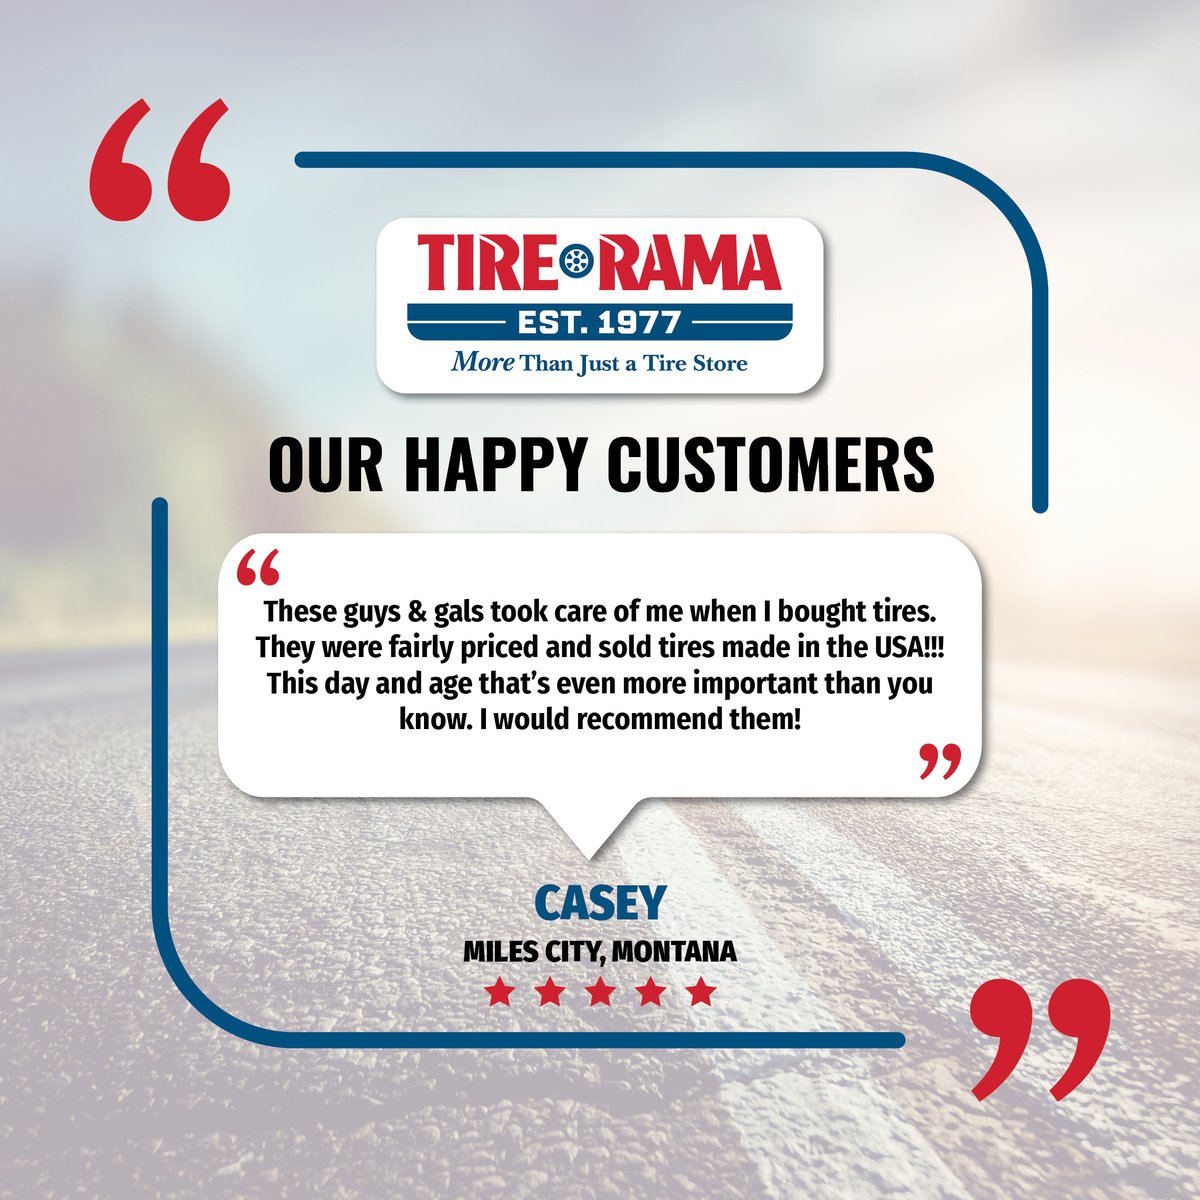 Proudly Made in the USA! #USAMade #Tires #TireRama